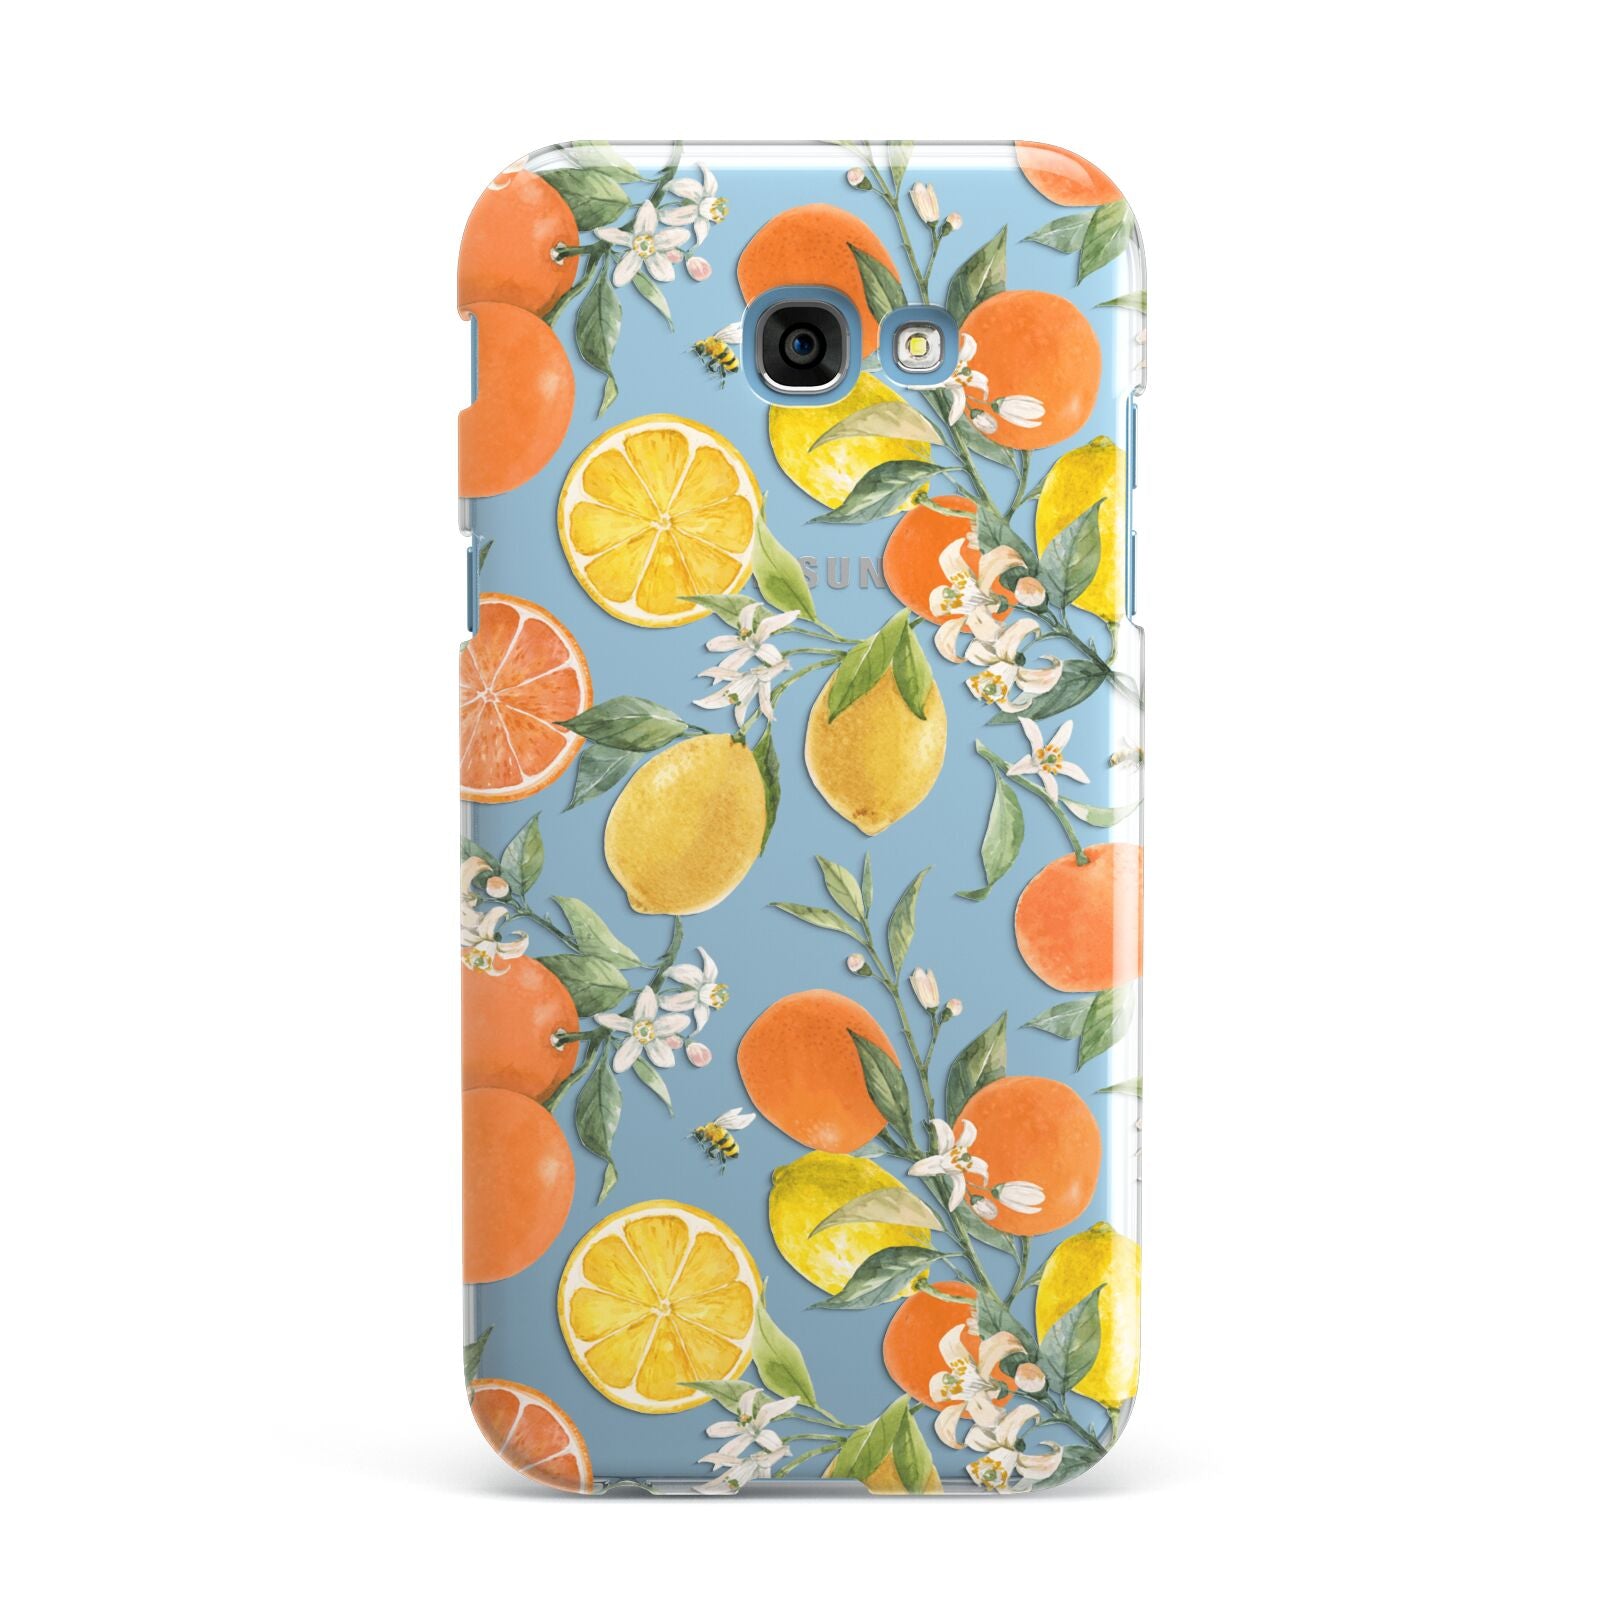 Lemons and Oranges Samsung Galaxy A7 2017 Case